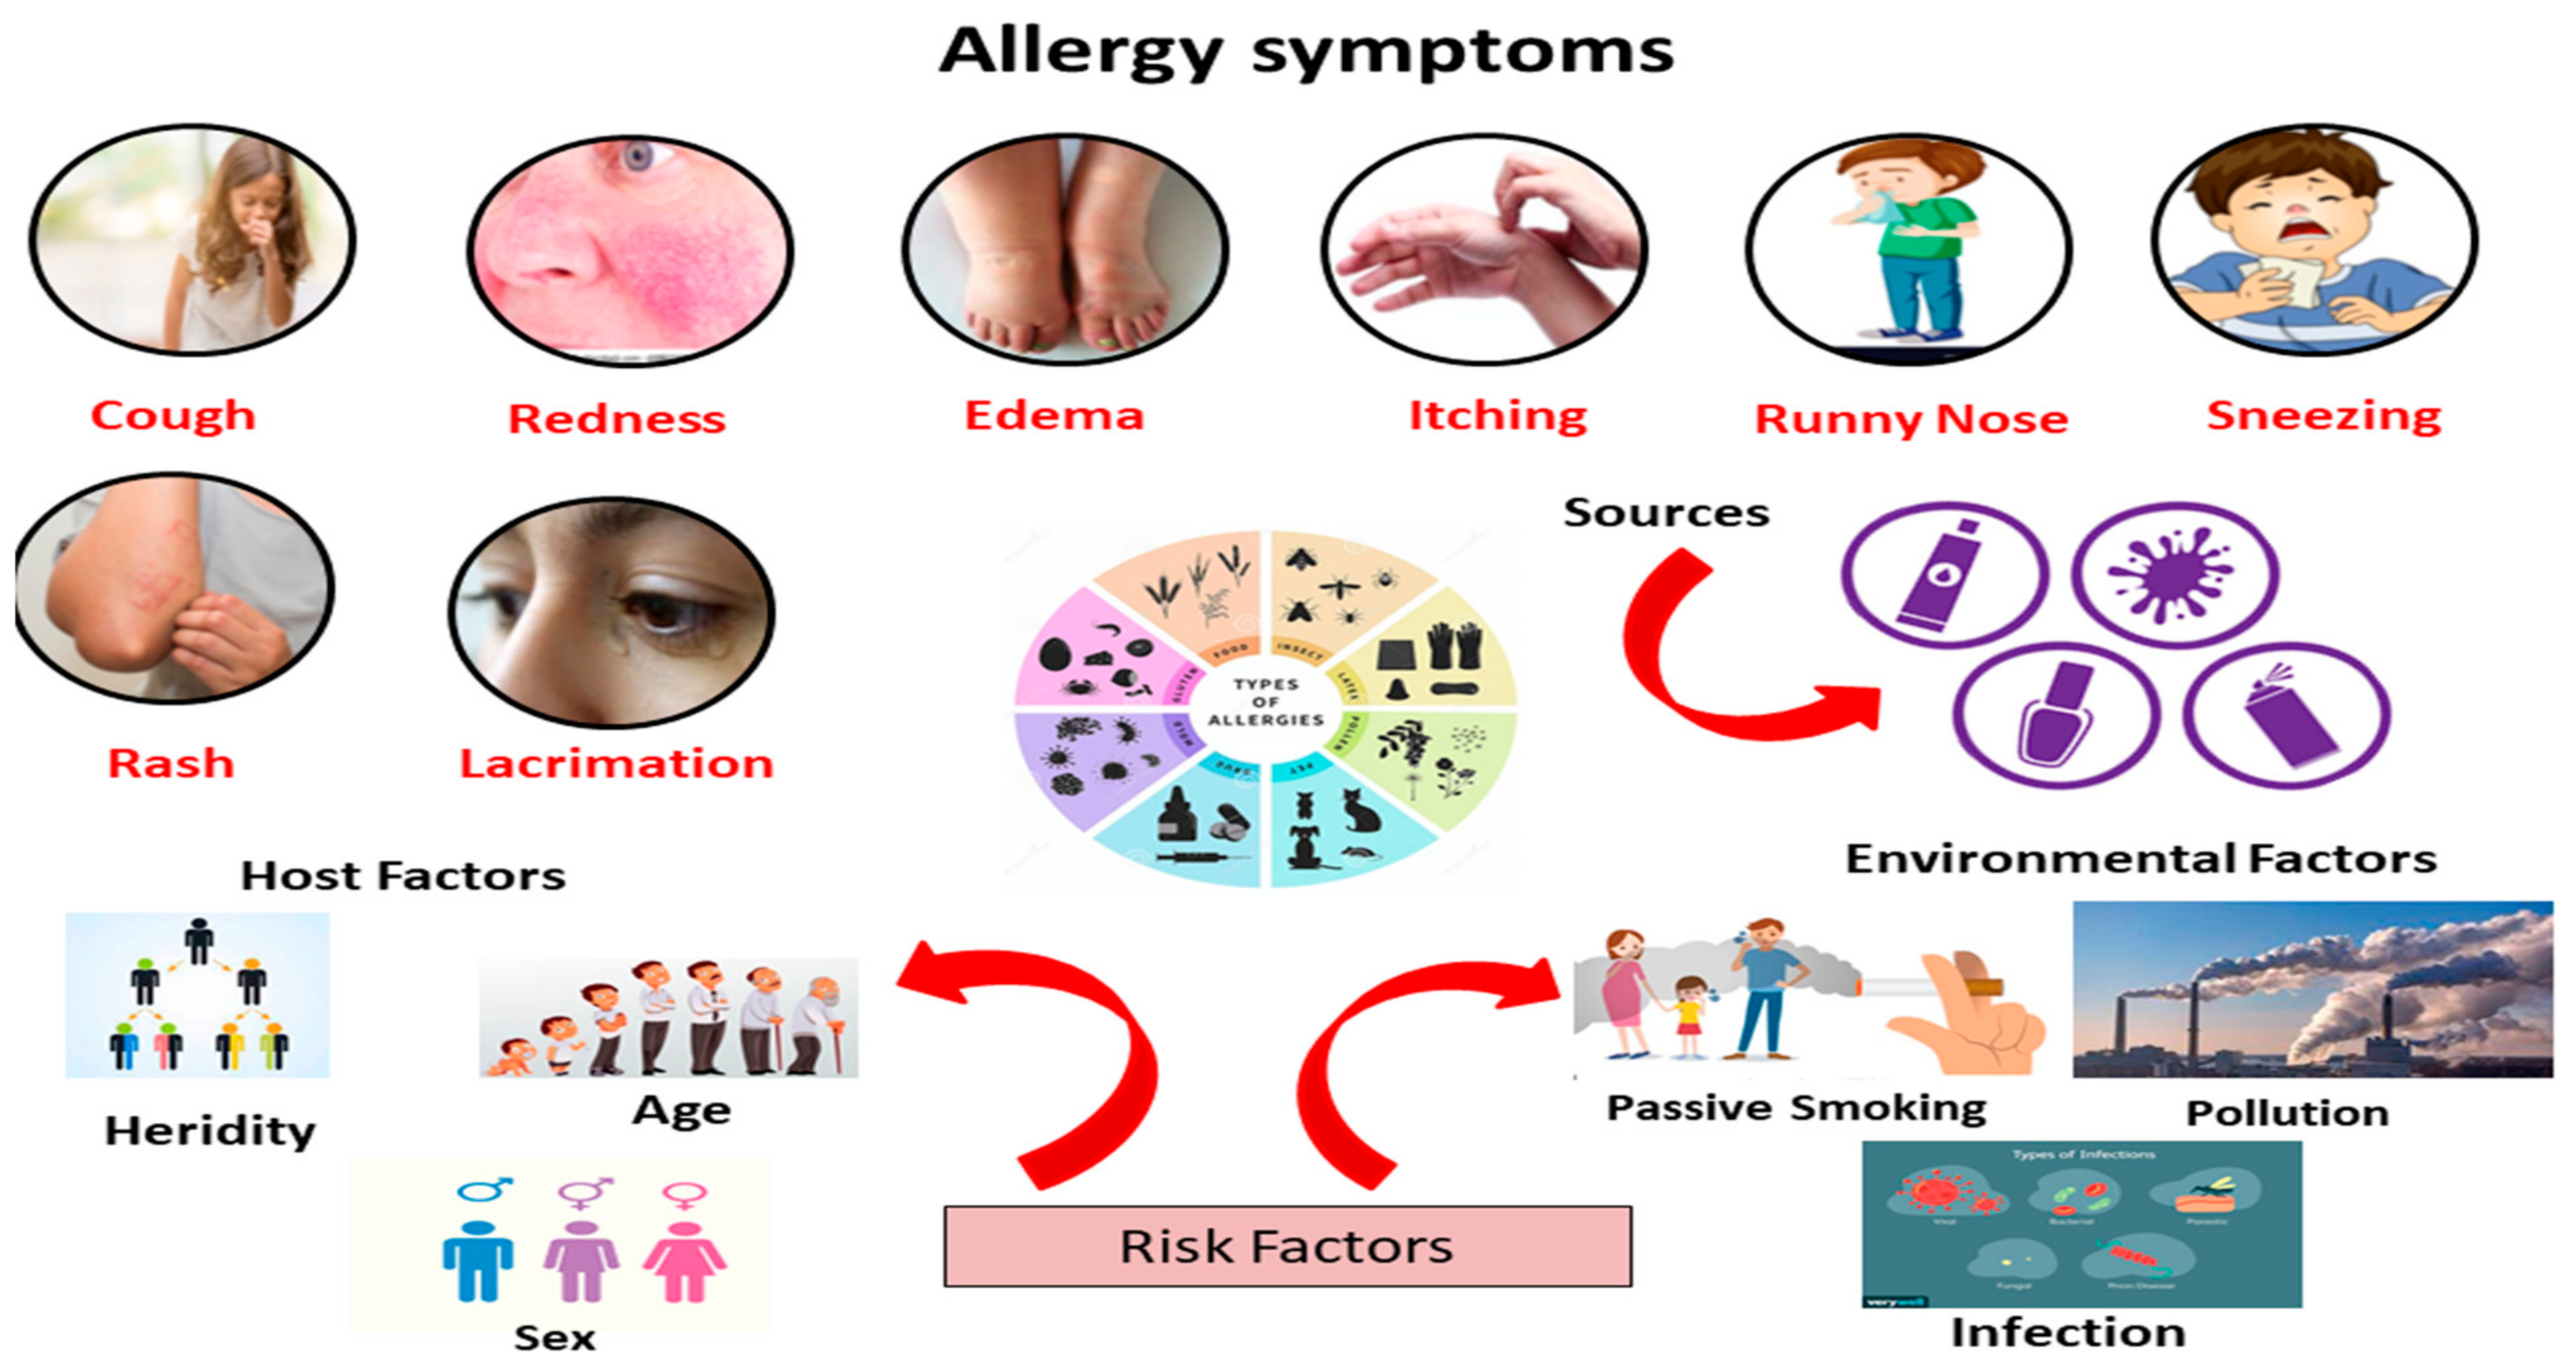 IJERPH | Free Full-Text | Allergic Diseases: A Comprehensive Review on Risk  Factors, Immunological Mechanisms, Link with COVID-19, Potential  Treatments, and Role of Allergen Bioinformatics